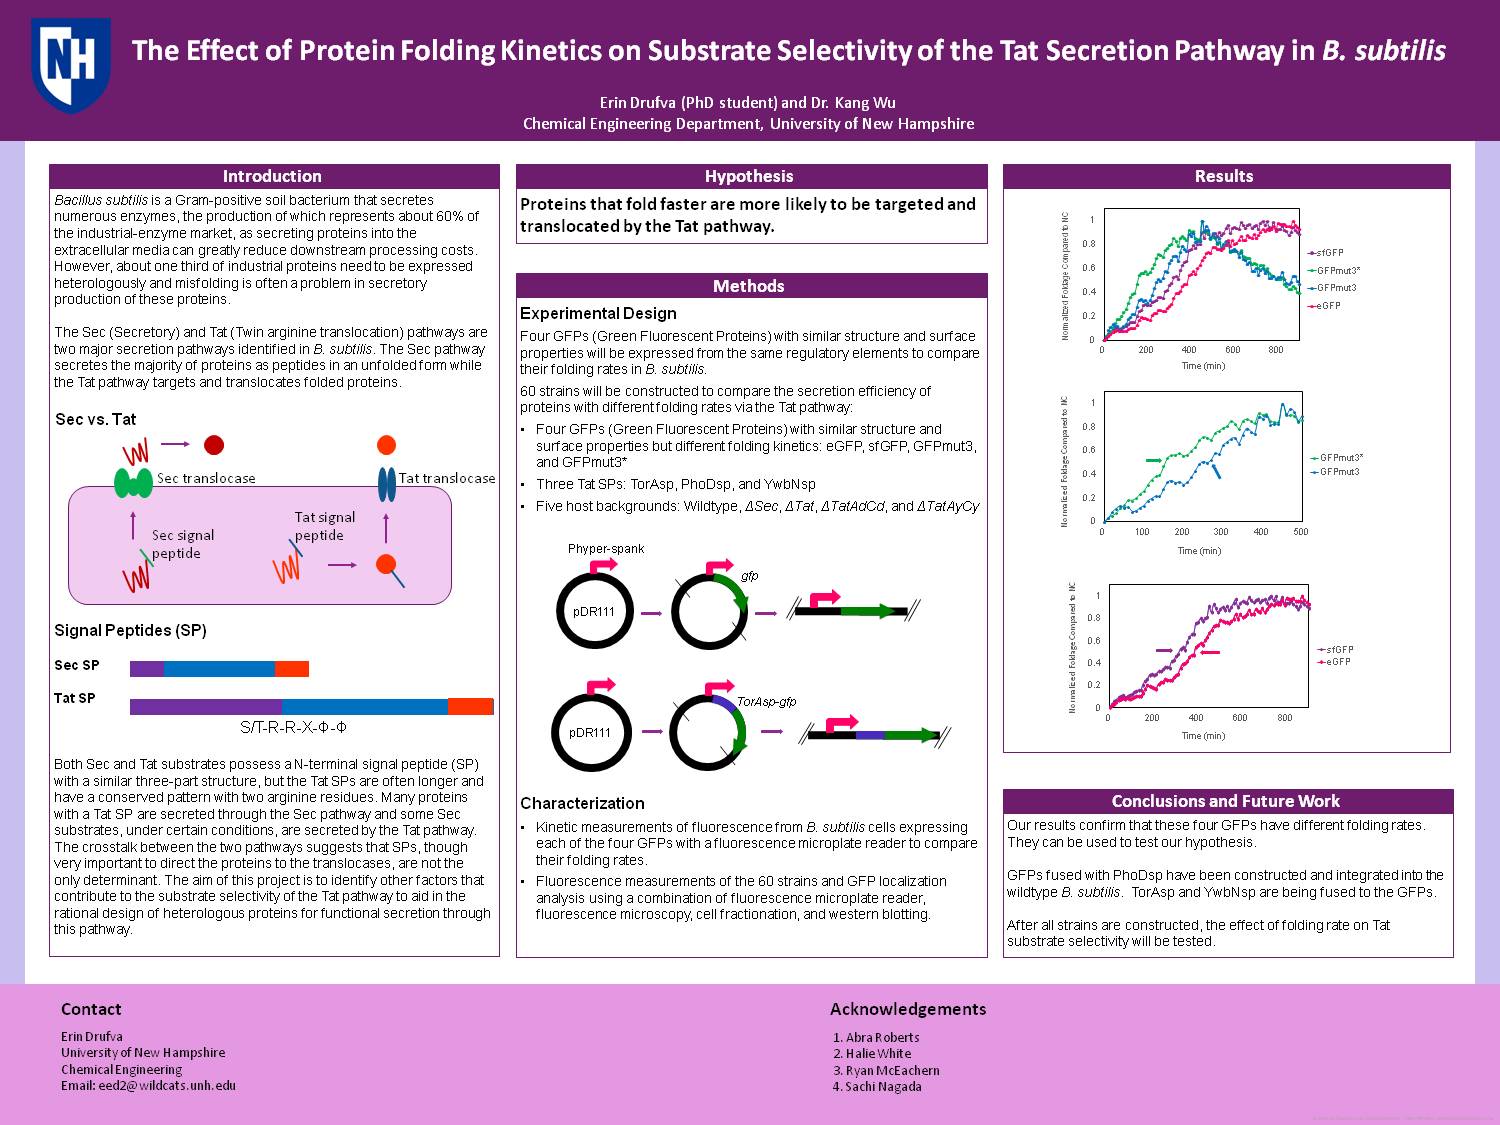 The Effect Of Protein Folding Kinetics On Substrate Selectivity Of The Tat Secretion Pathway In B. Subtilis by eed2